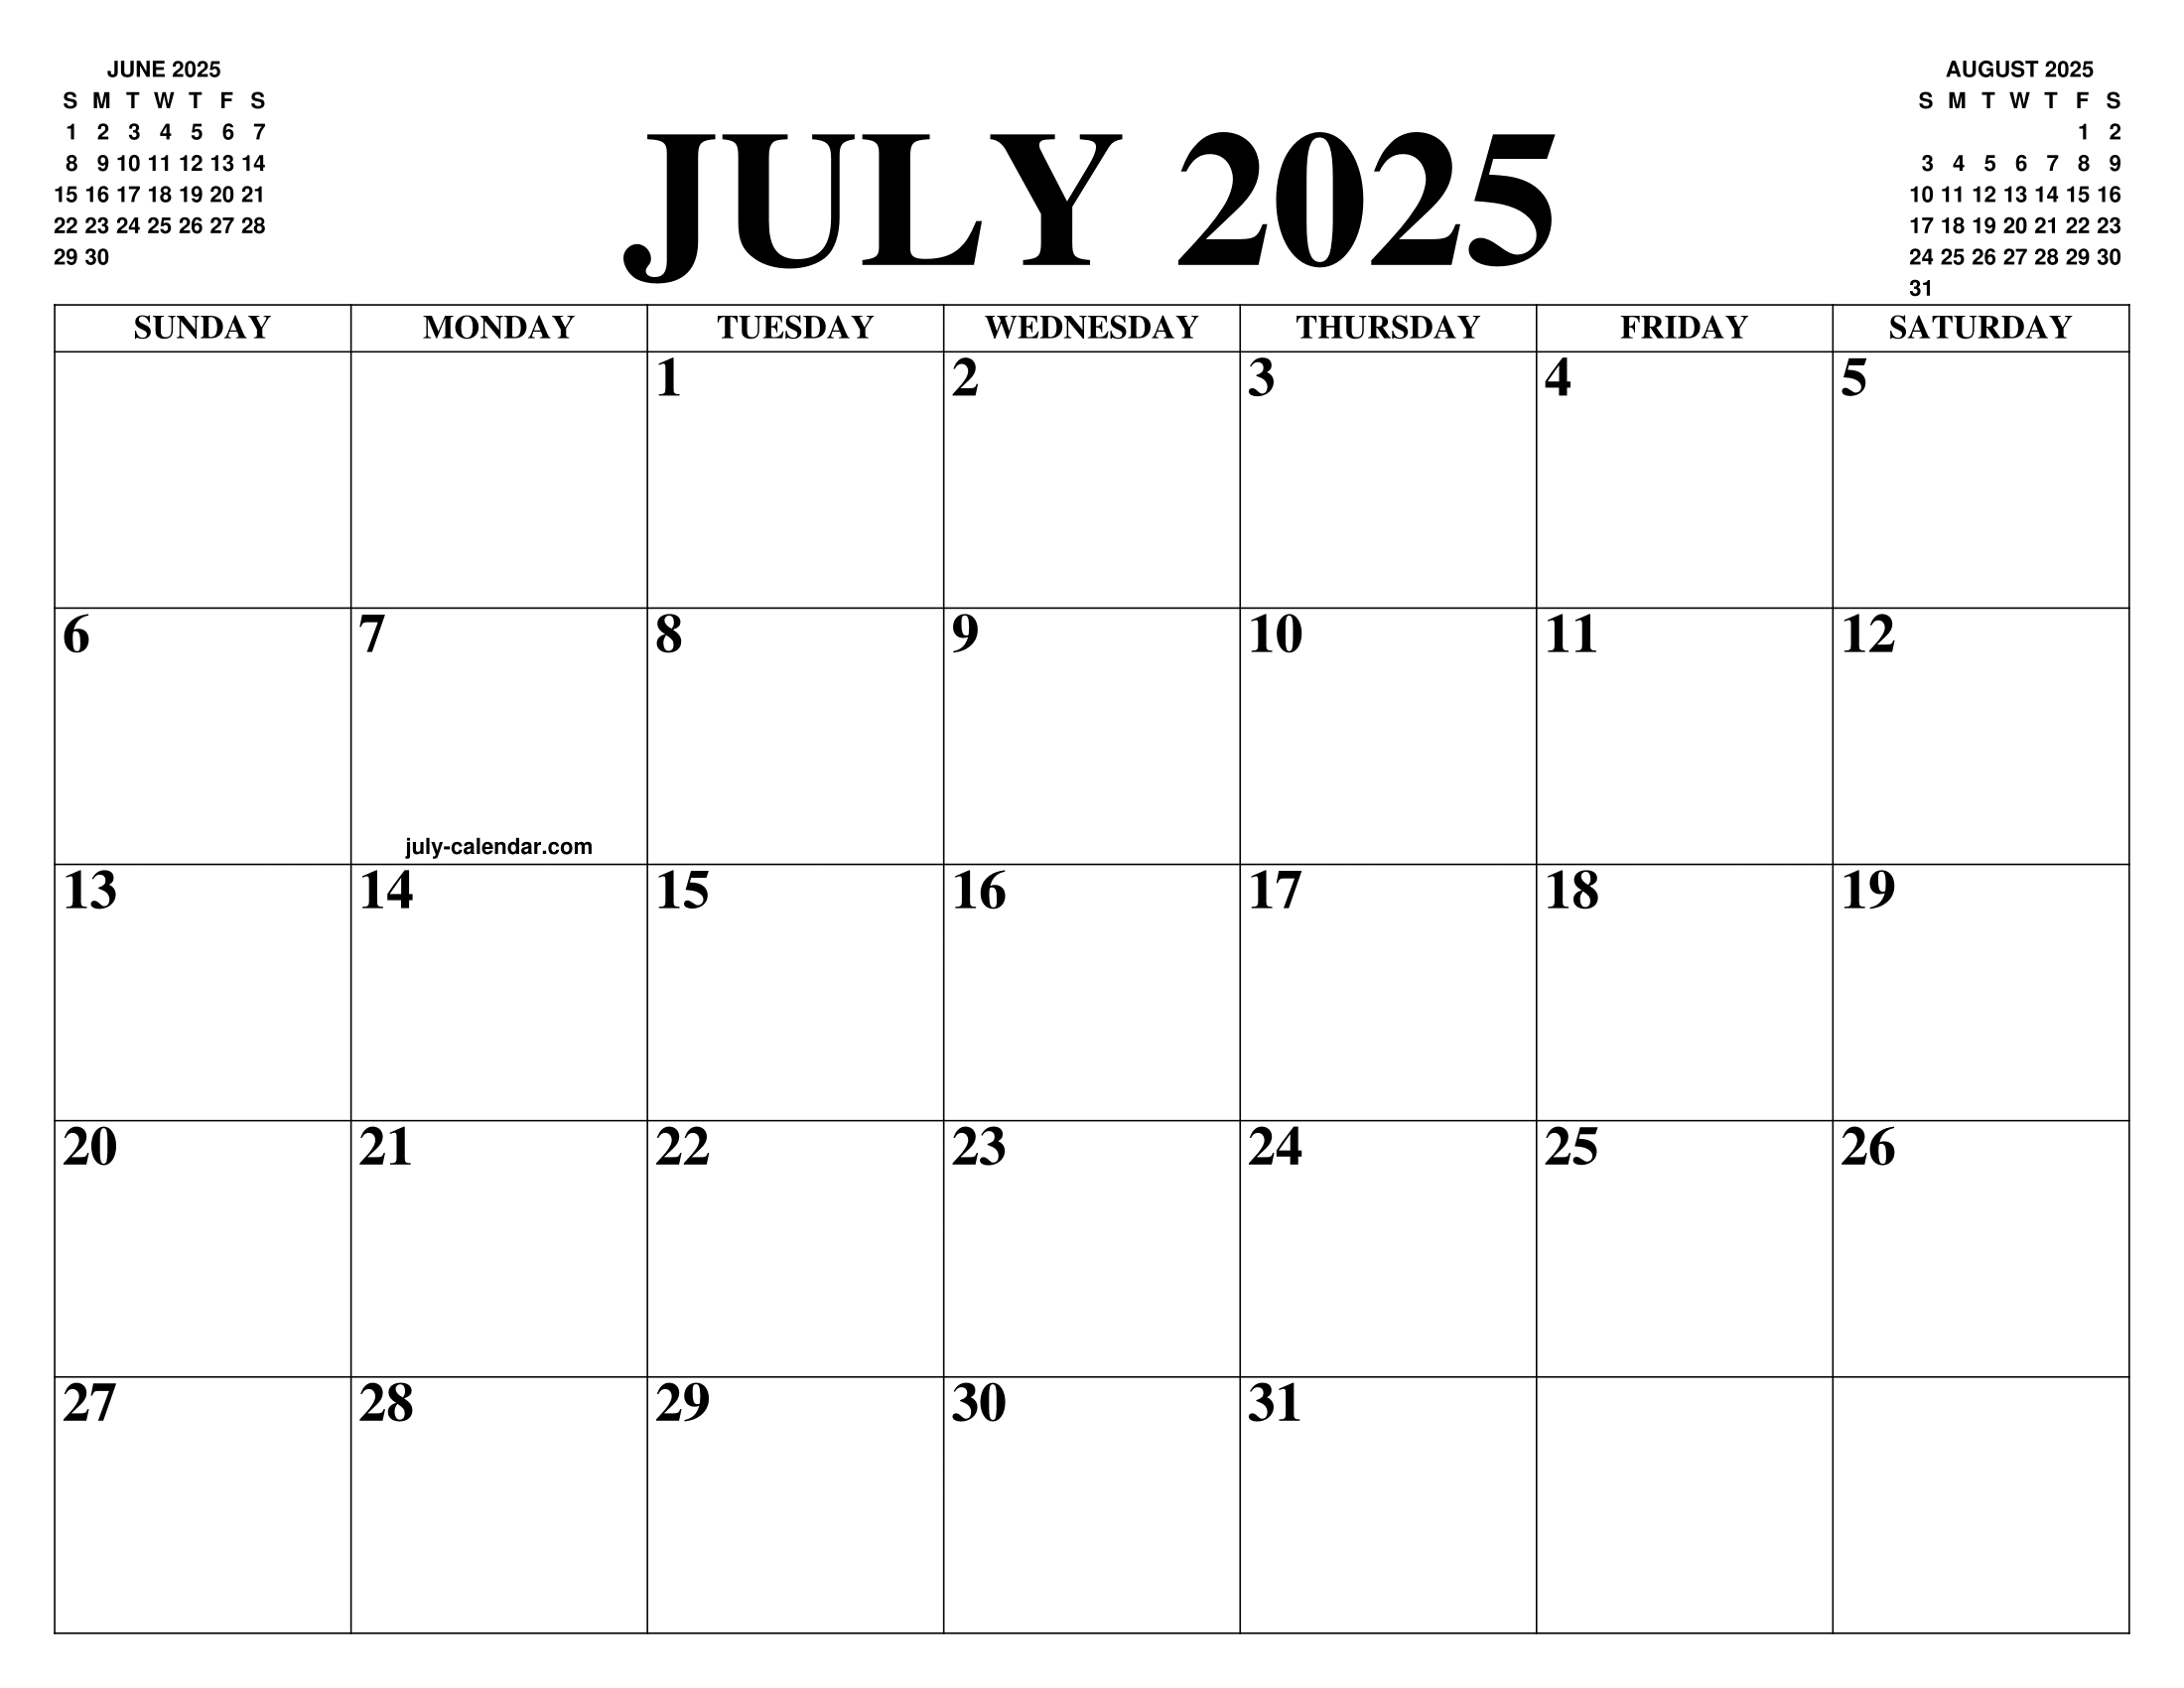 JULY 2025 CALENDAR OF THE MONTH FREE PRINTABLE JULY CALENDAR OF THE